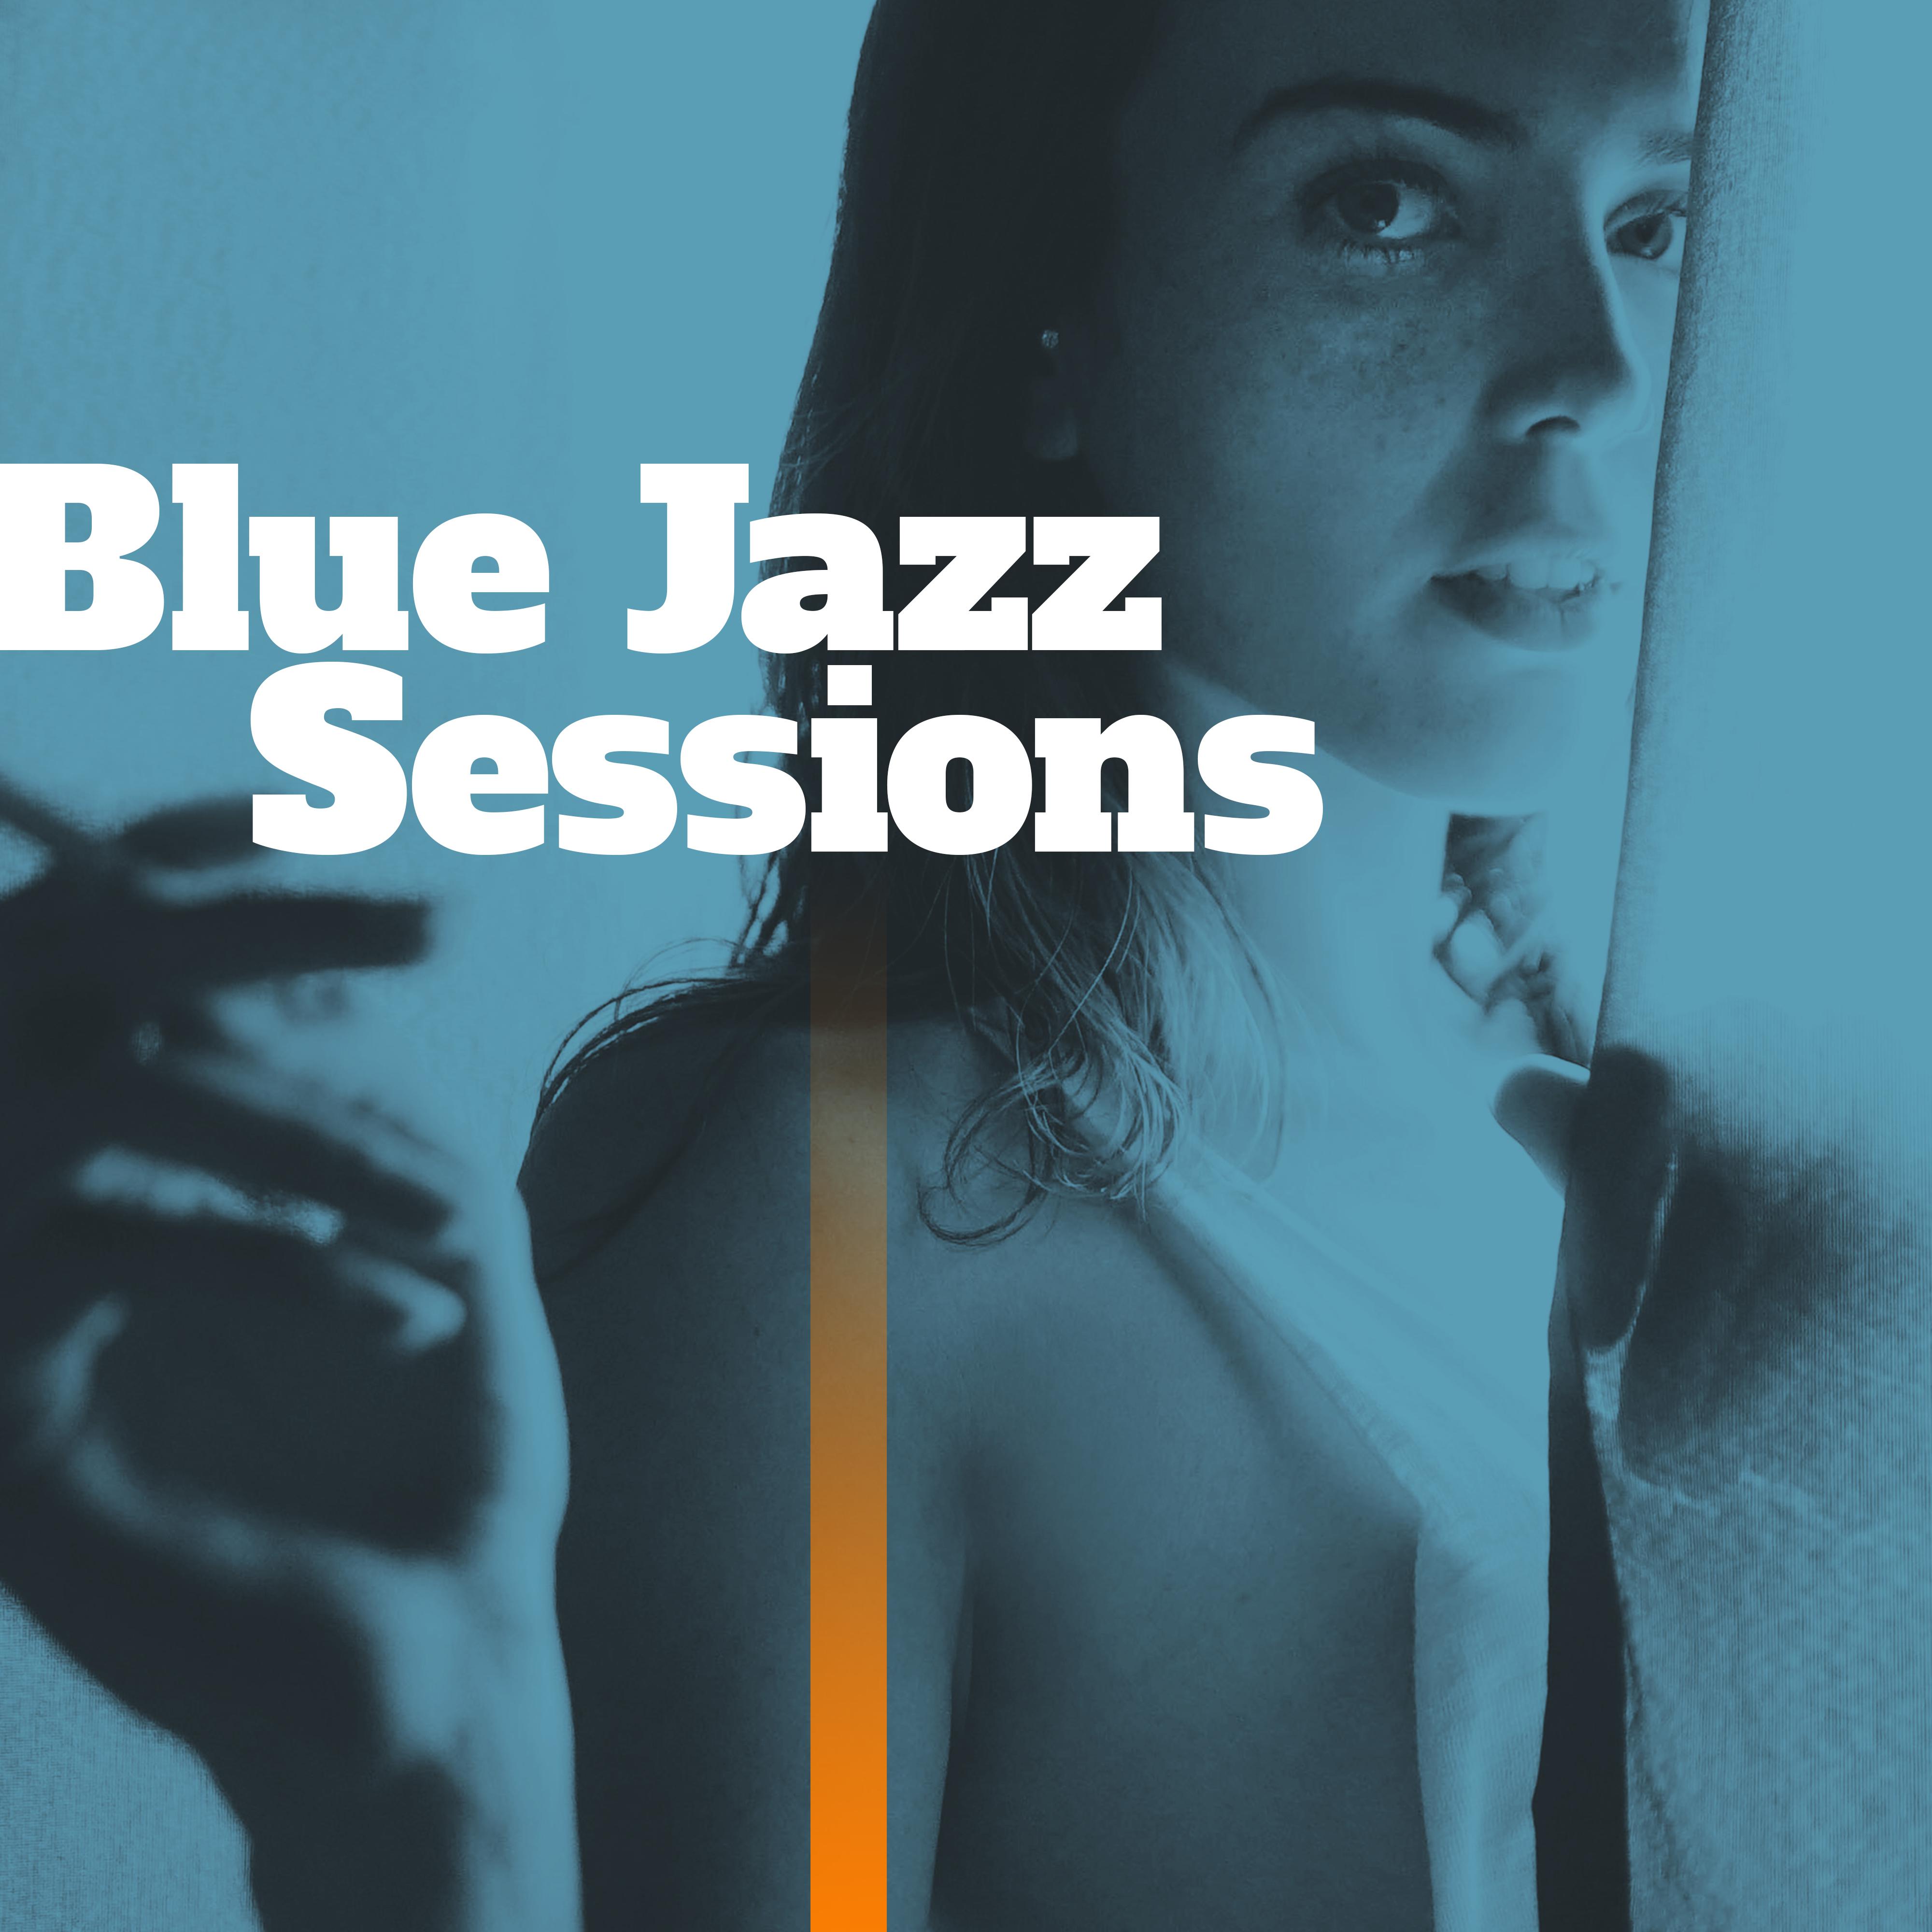 Blue Jazz Sessions  Ambient Instrumental Jazz, Mellow Piano Sounds, Jazz Ensemble, Relaxed Jazz